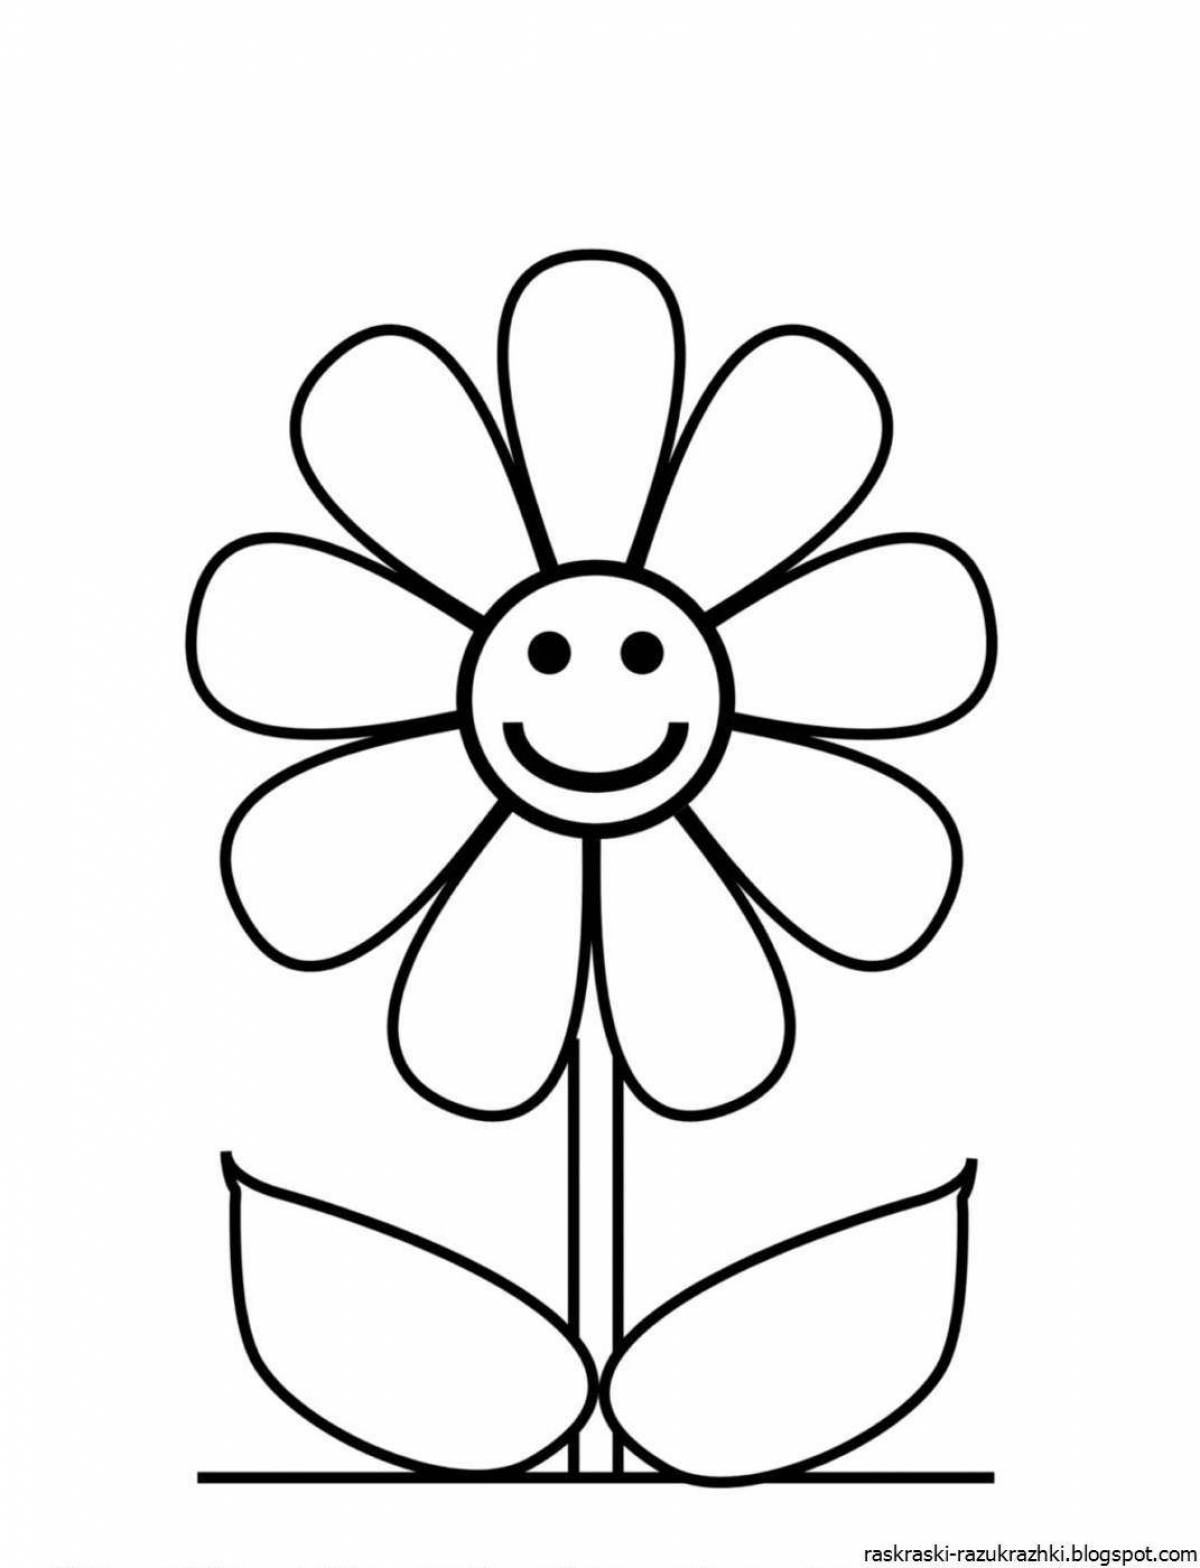 Fun coloring flowers for kids